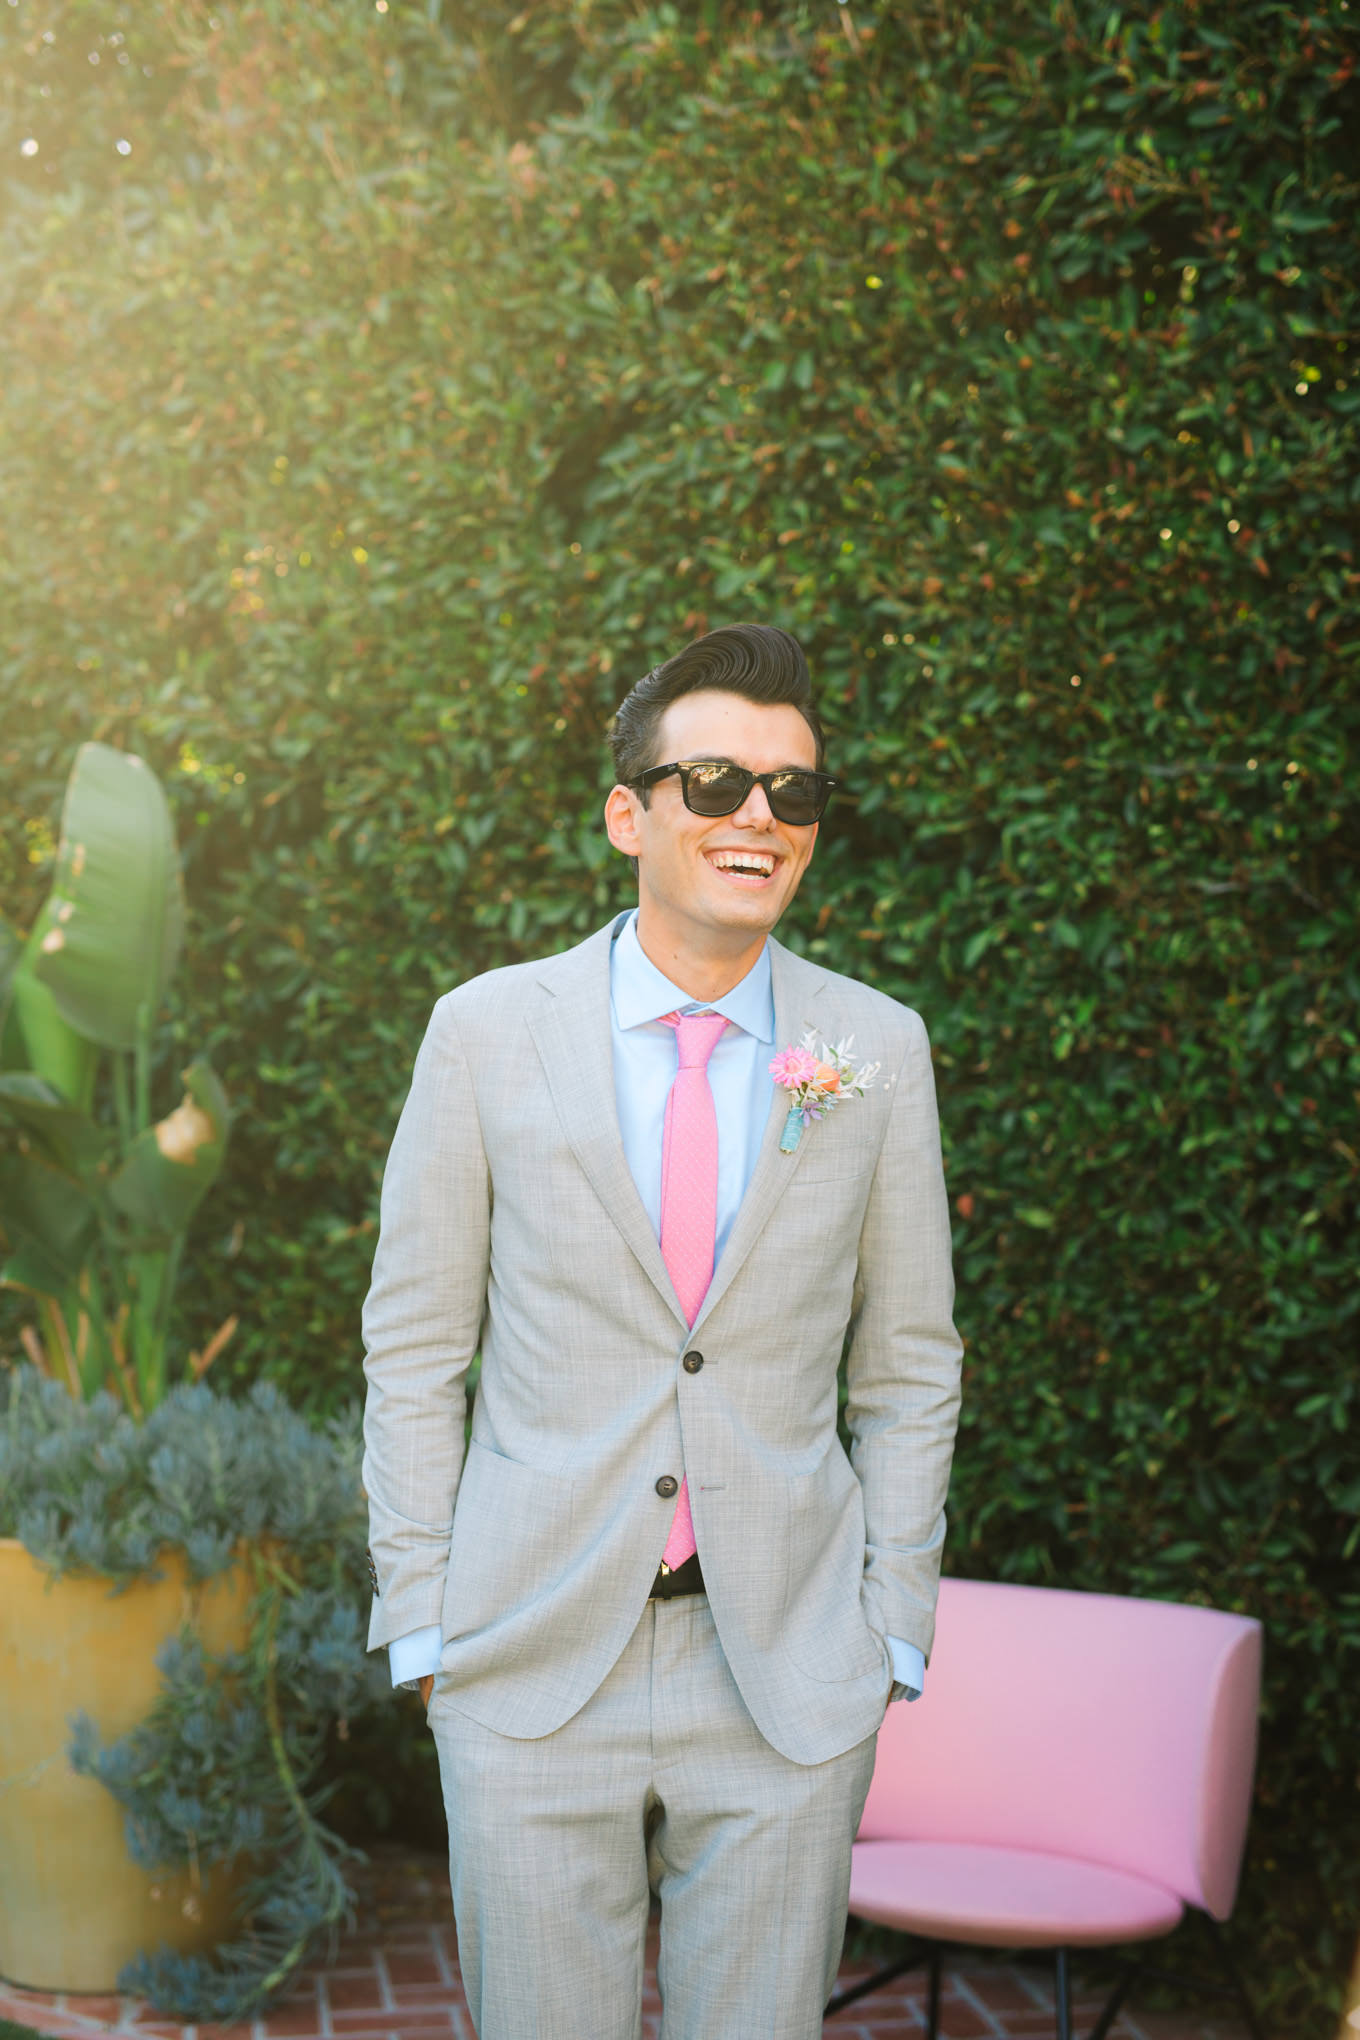 Modern pastel groom's attire | Colorful pop-up micro wedding at The Ruby Street Los Angeles featured on Green Wedding Shoes | Colorful and elevated photography for fun-loving couples in Southern California | #colorfulwedding #popupwedding #weddingphotography #microwedding Source: Mary Costa Photography | Los Angeles